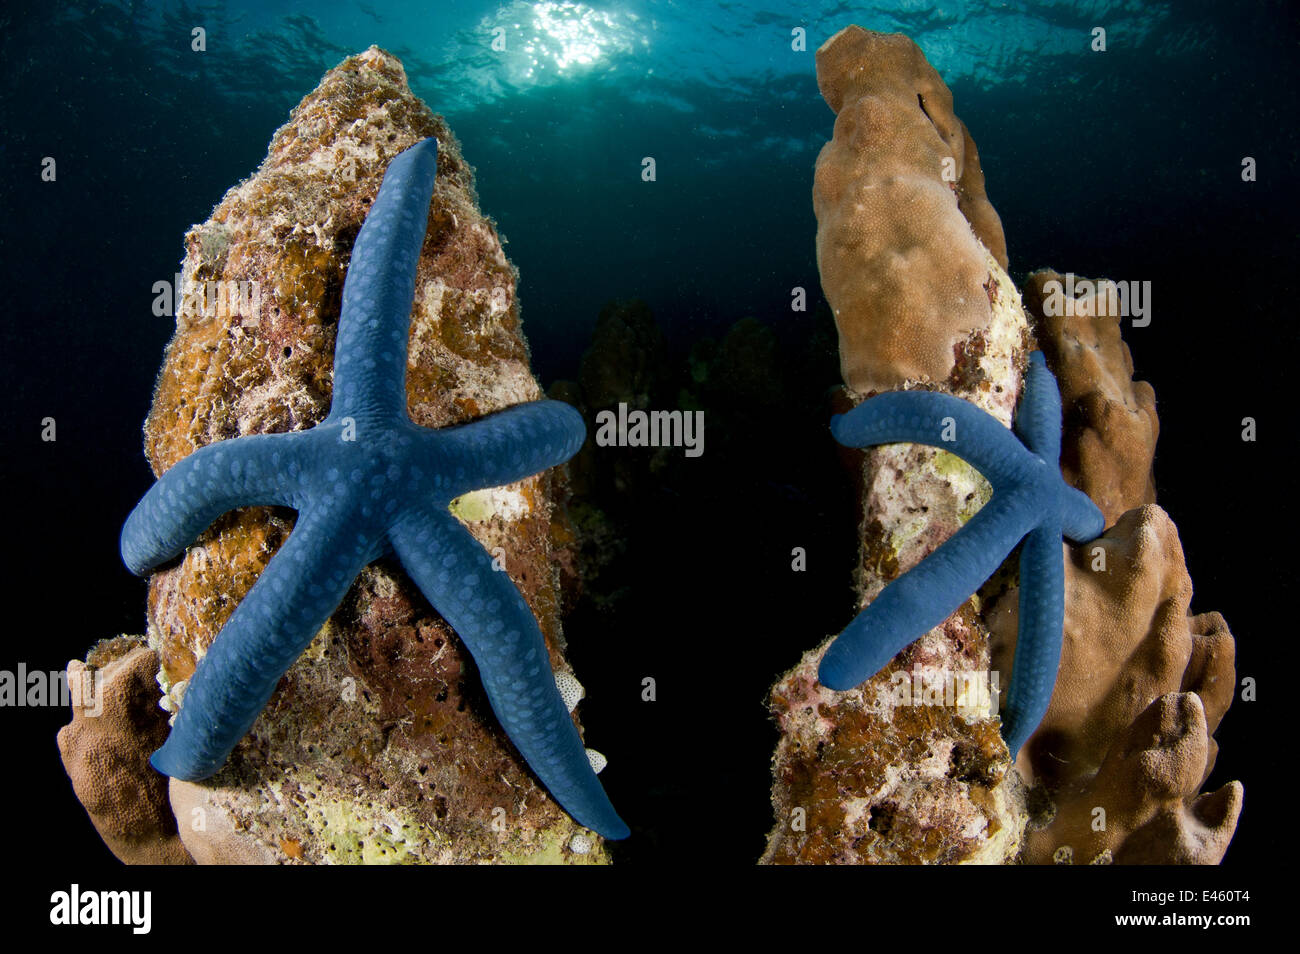 Blue linkia starfish (Linckia laevigata) pair attached to the dead part of coral, New Ireland, Papua New Guinea Stock Photo